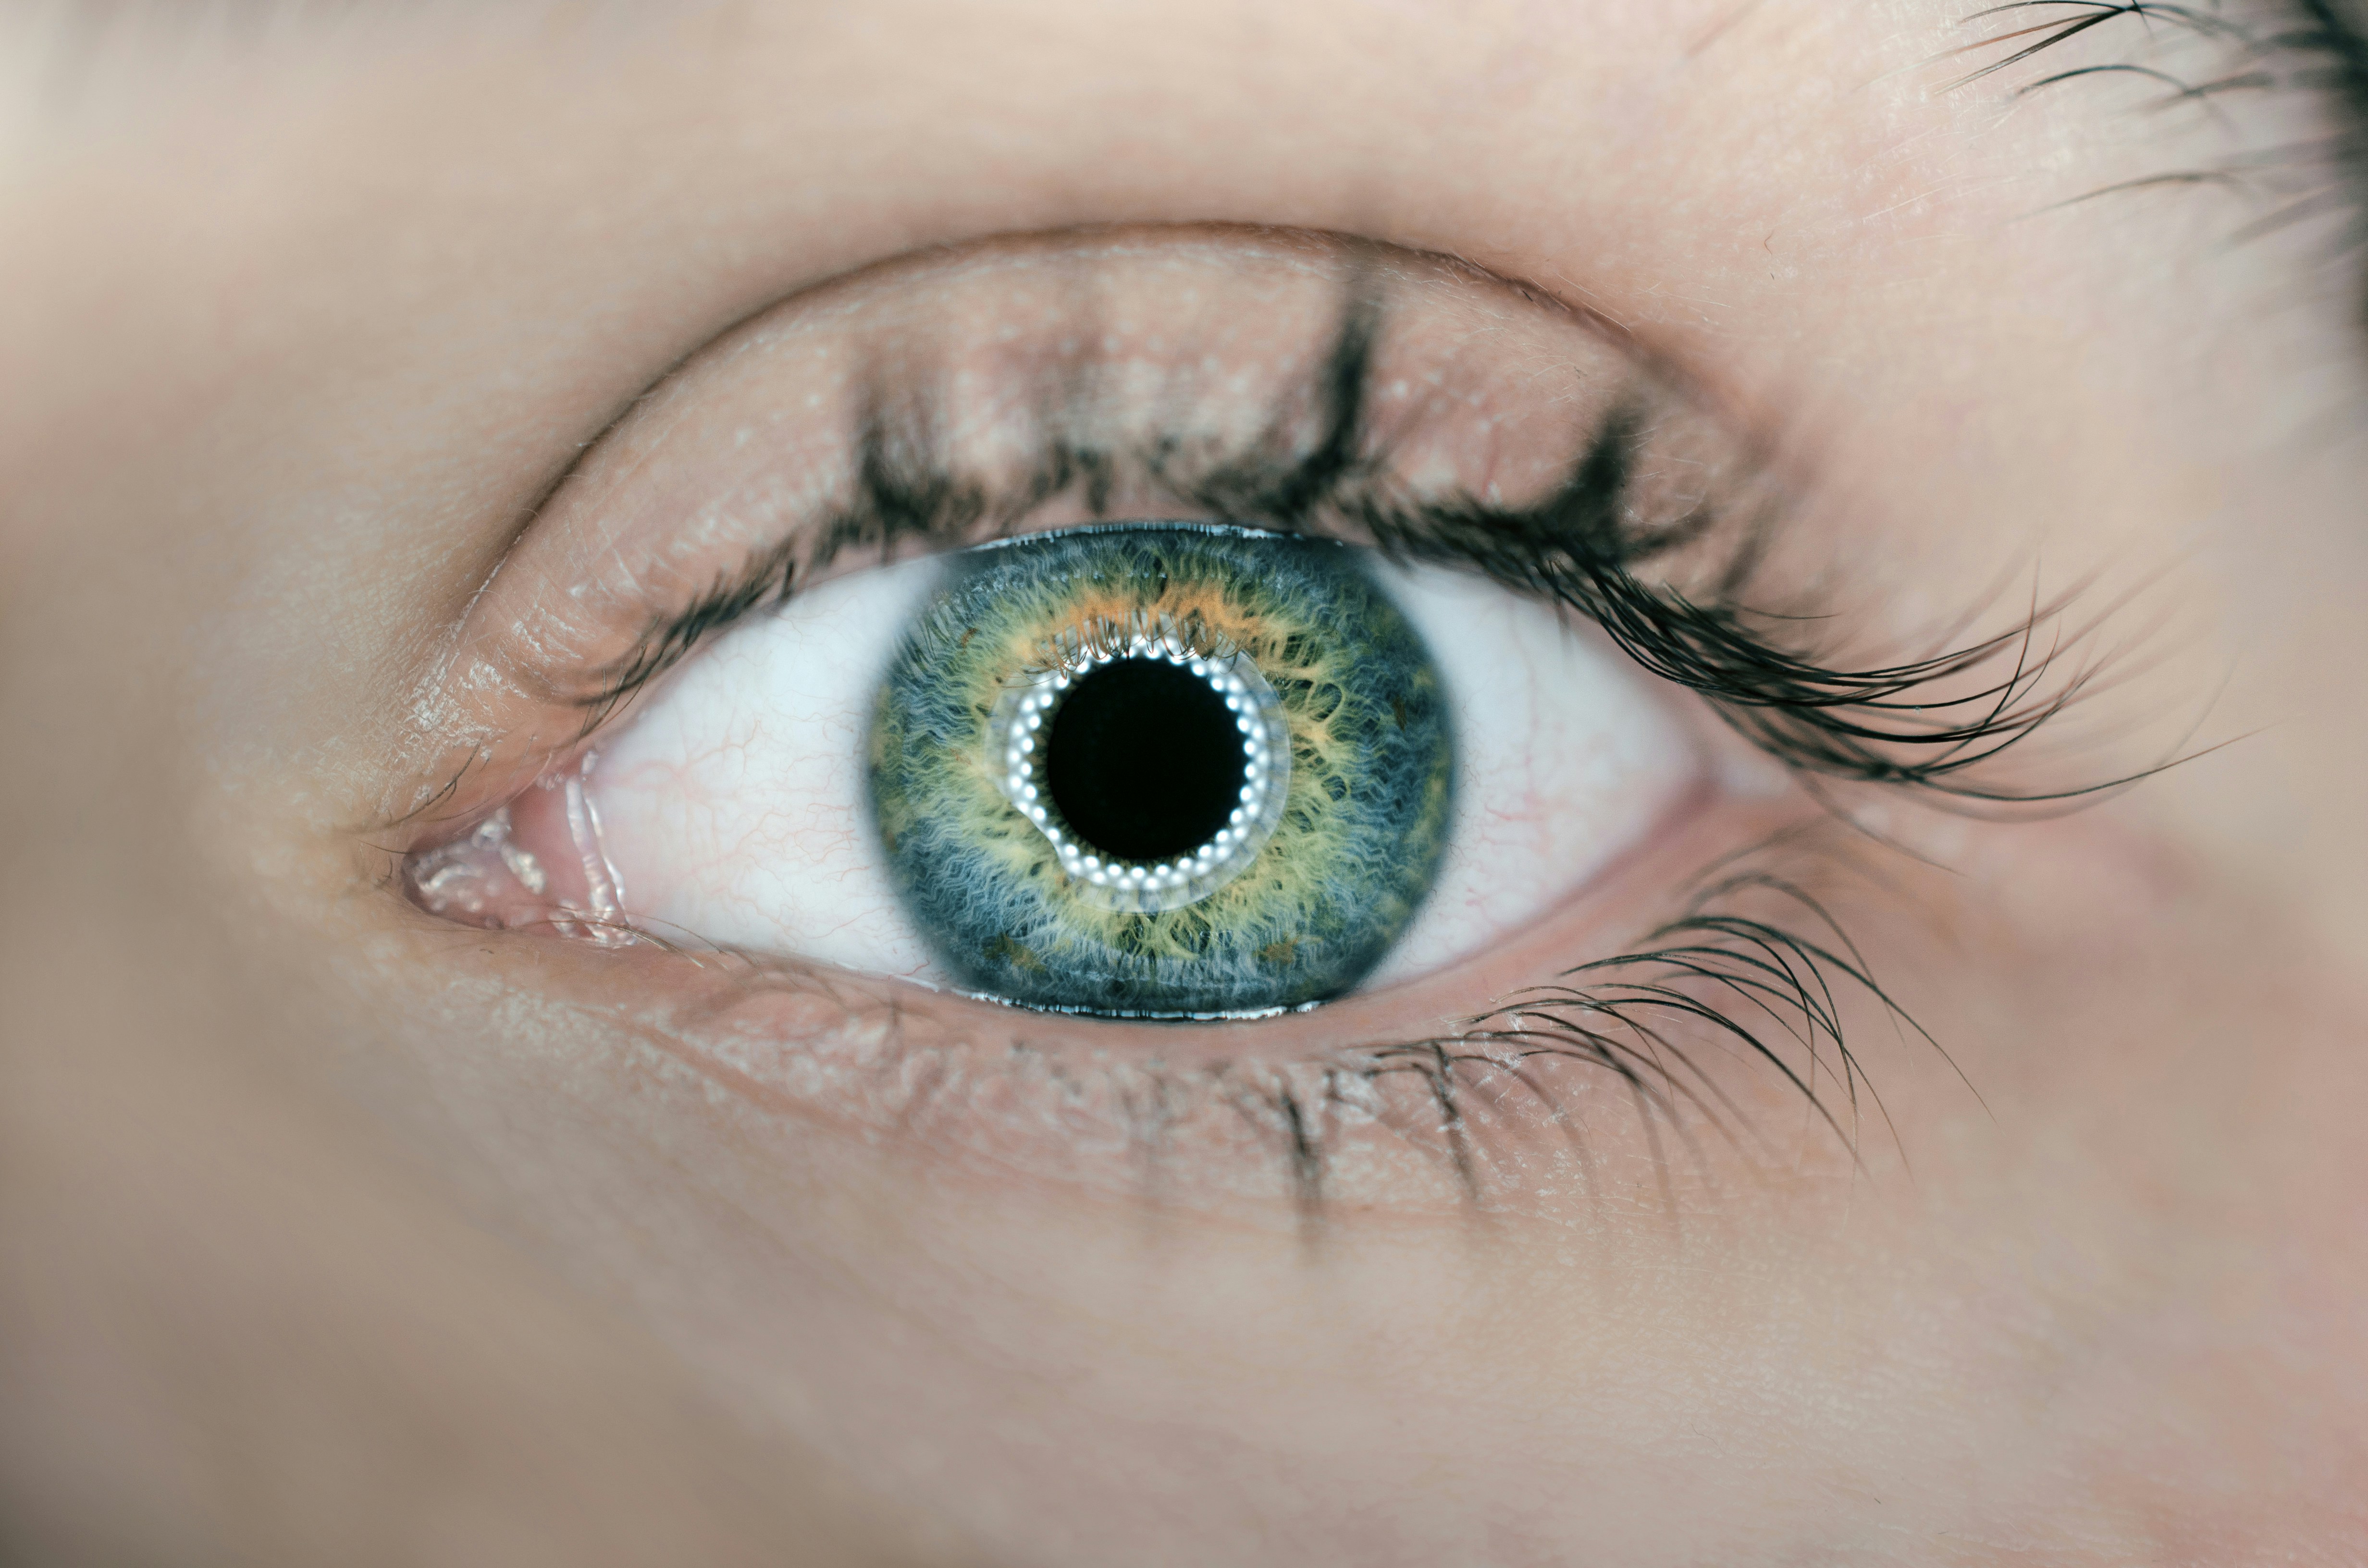 Frequently Asked Questions about Dry Eye Disorder